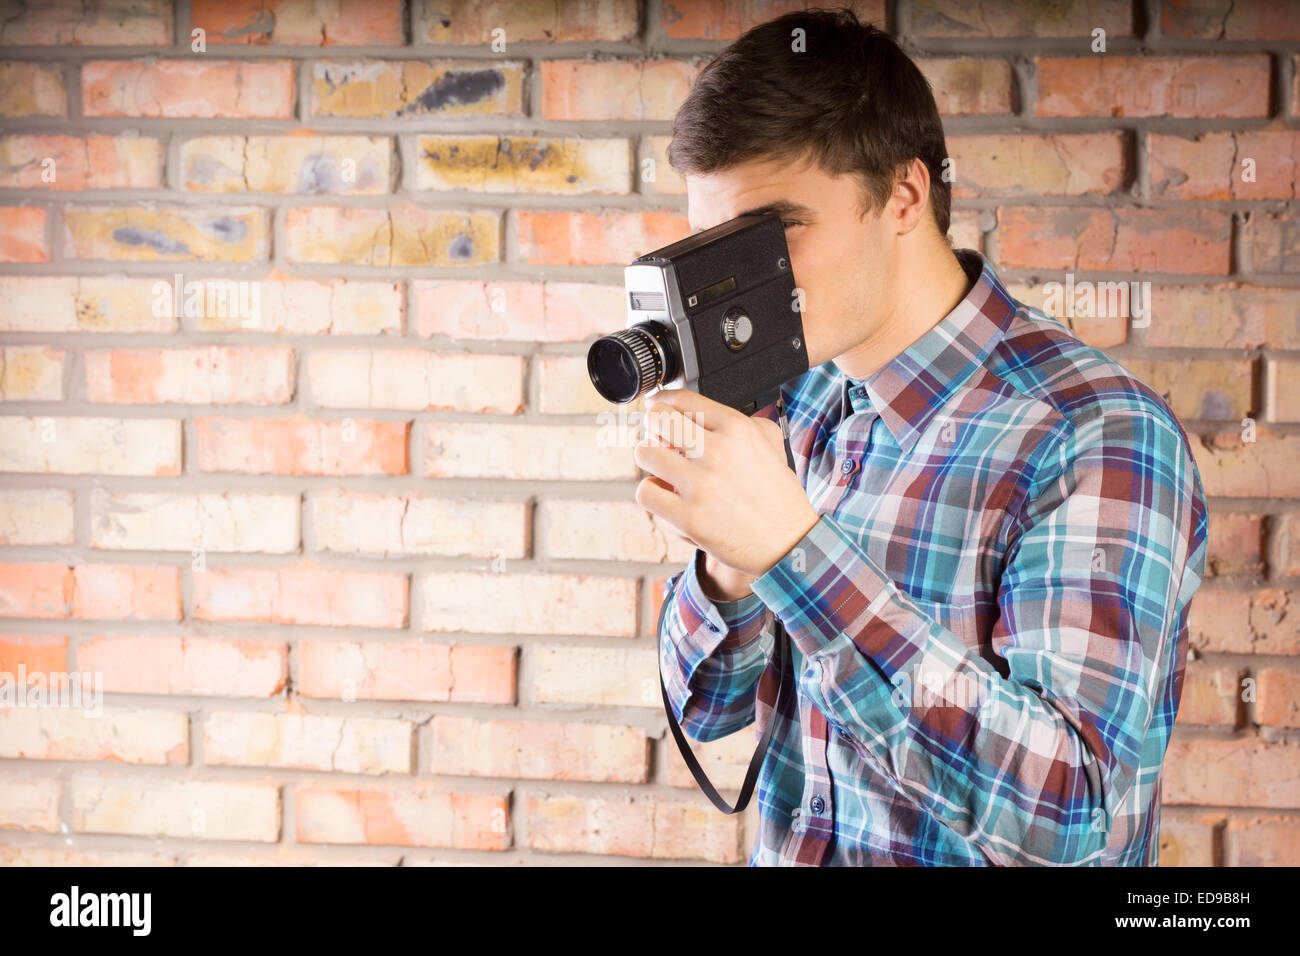 Young Handsome Man in Long Sleeve Shirt Taking Picture Using Vintage Camera with Brick Wall Background. Stock Photo